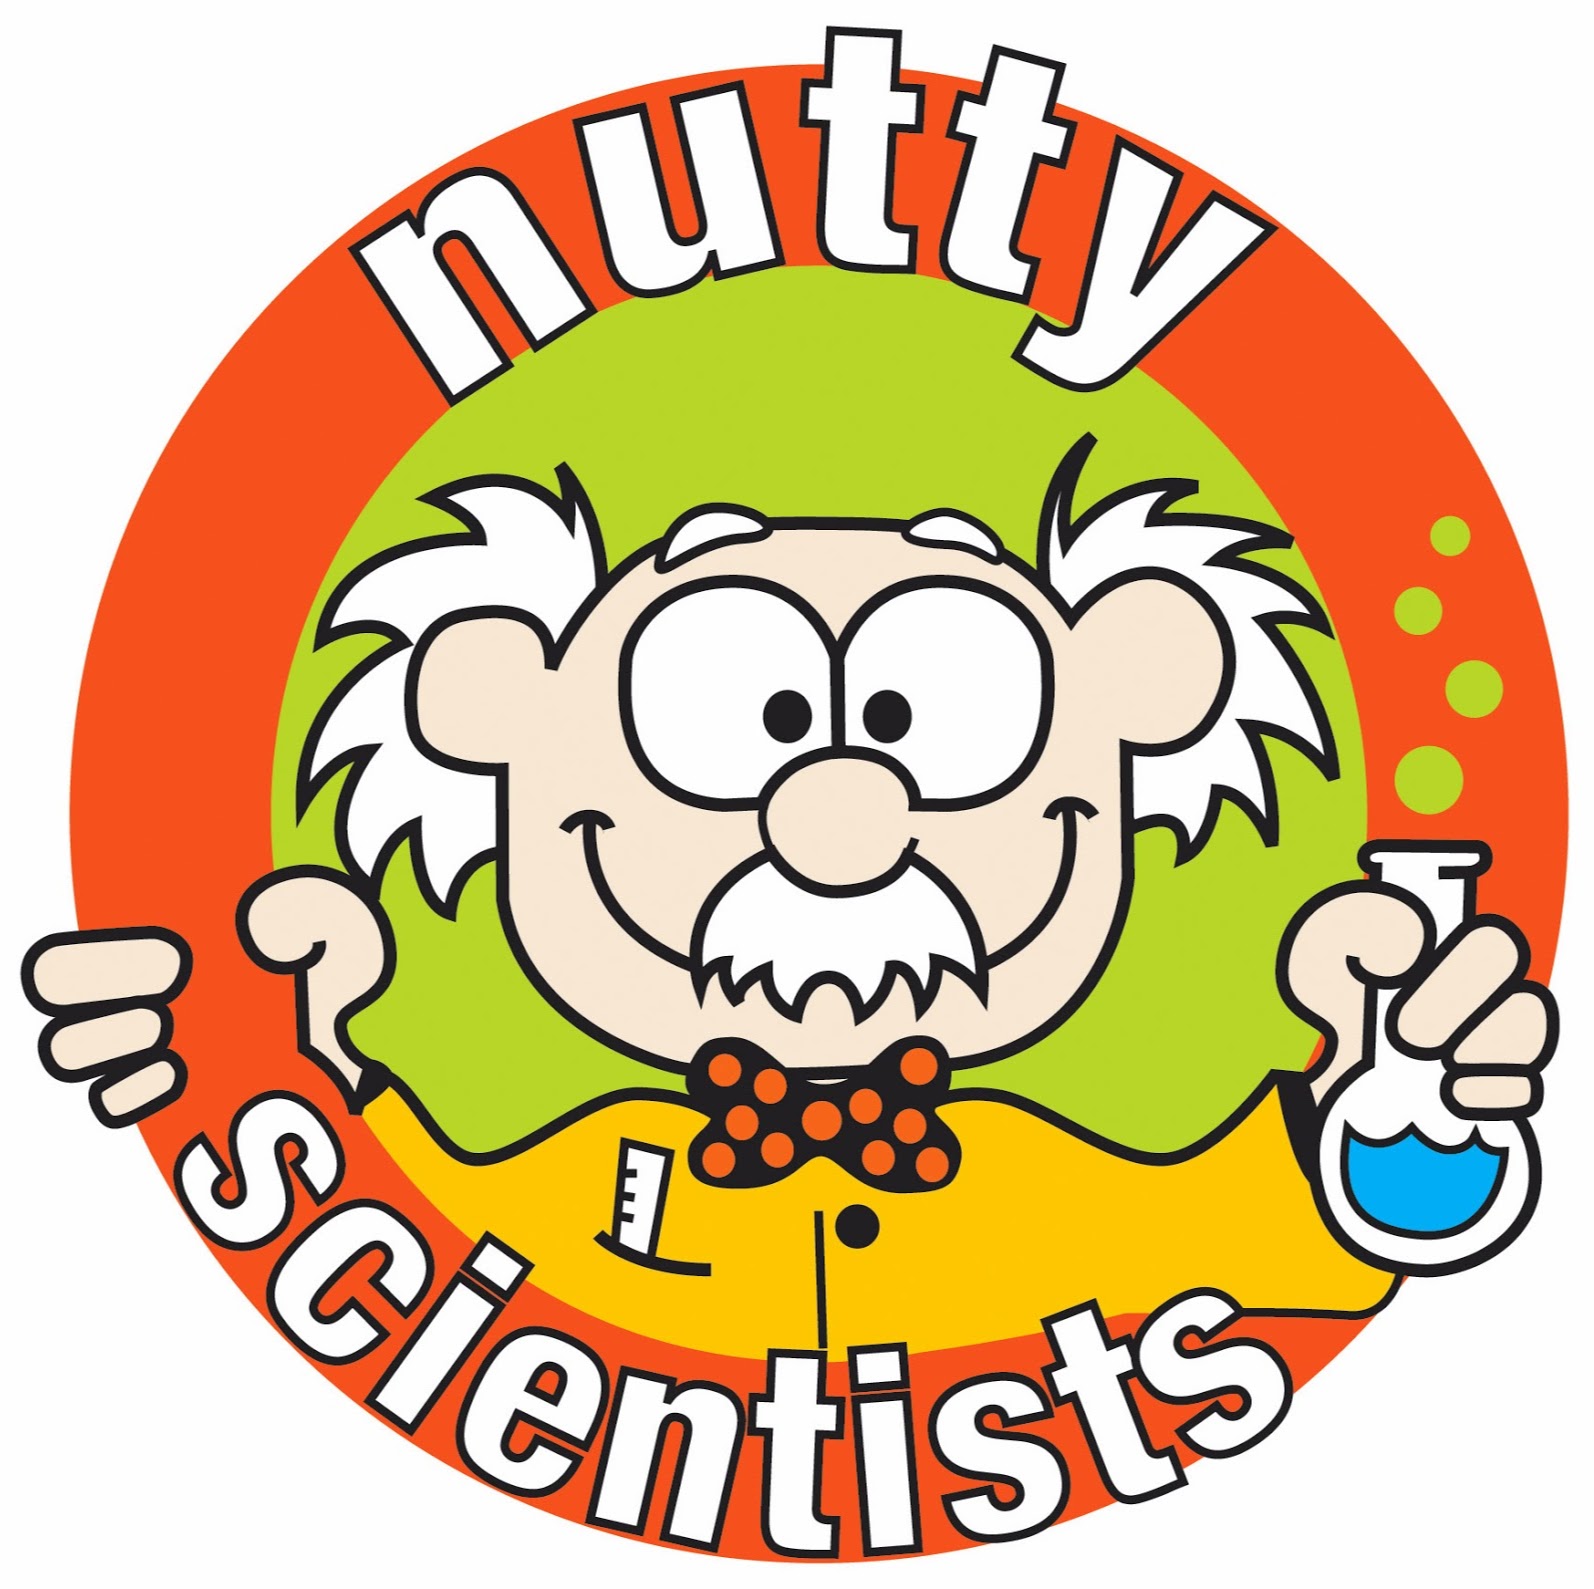 Nutty Scientists of Houston - Videos - Google+